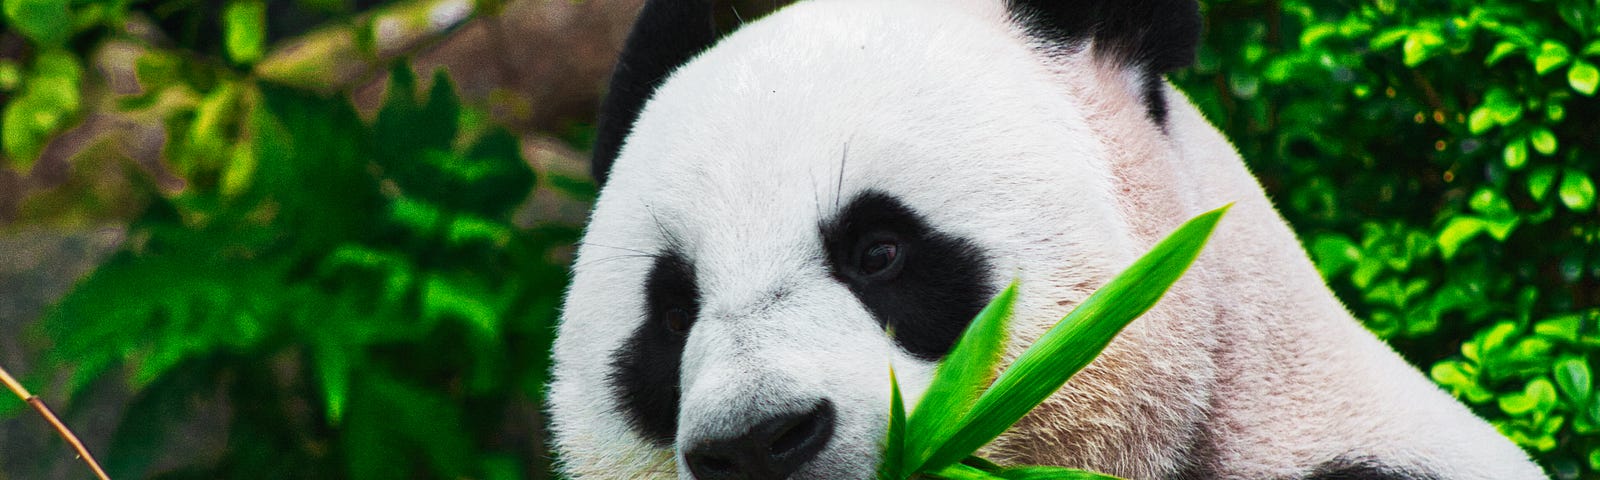 A giant panda, chowing down on some bamboo